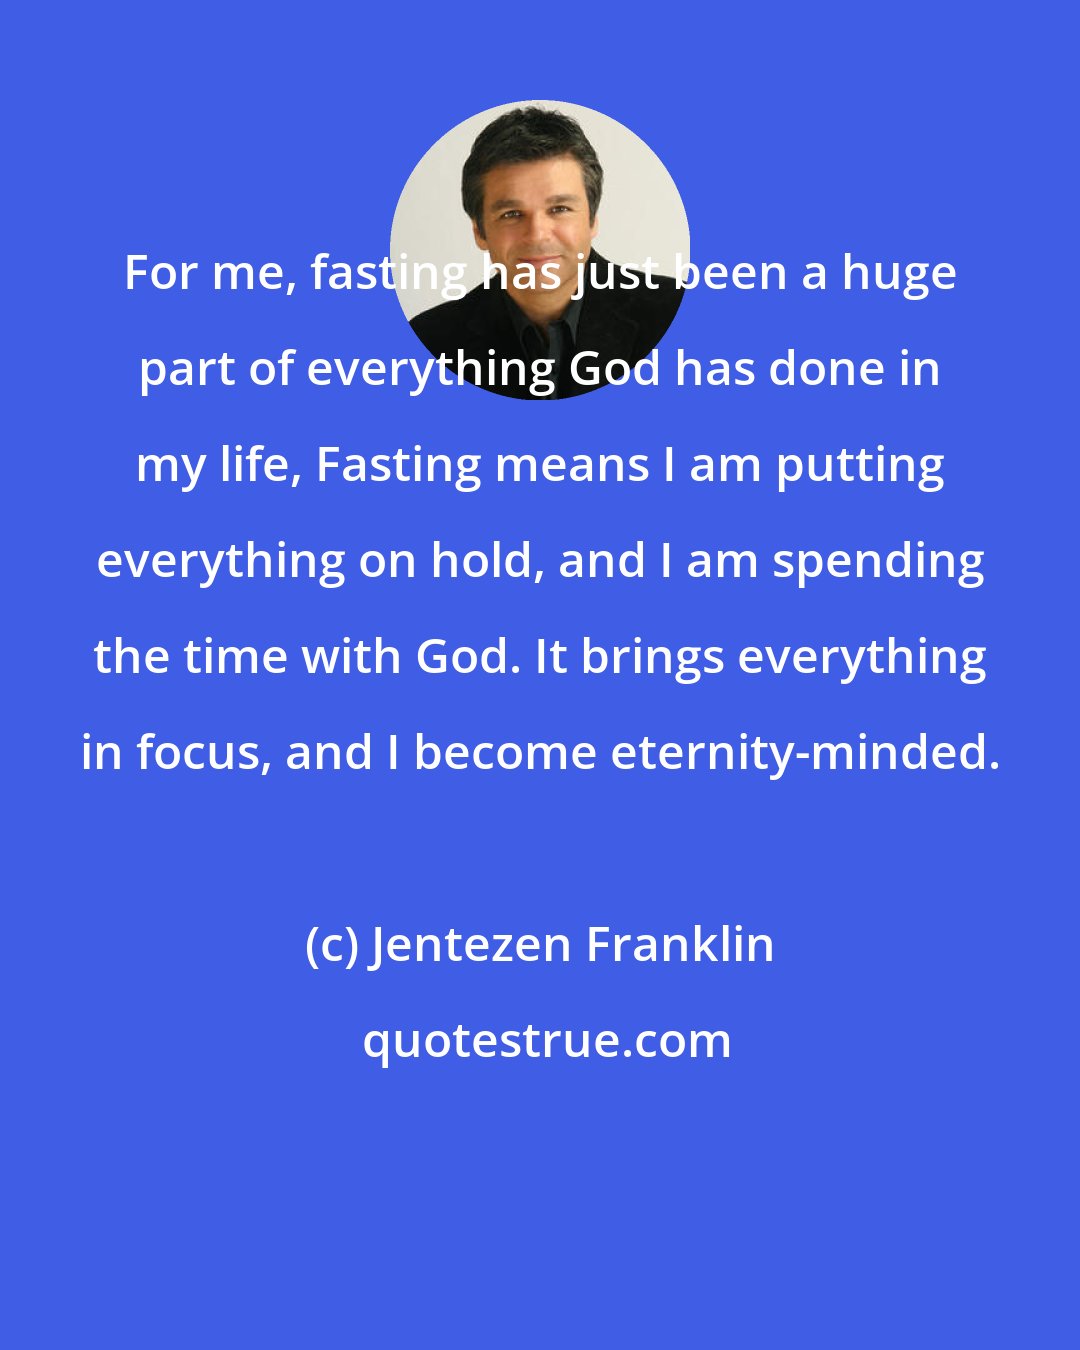 Jentezen Franklin: For me, fasting has just been a huge part of everything God has done in my life, Fasting means I am putting everything on hold, and I am spending the time with God. It brings everything in focus, and I become eternity-minded.